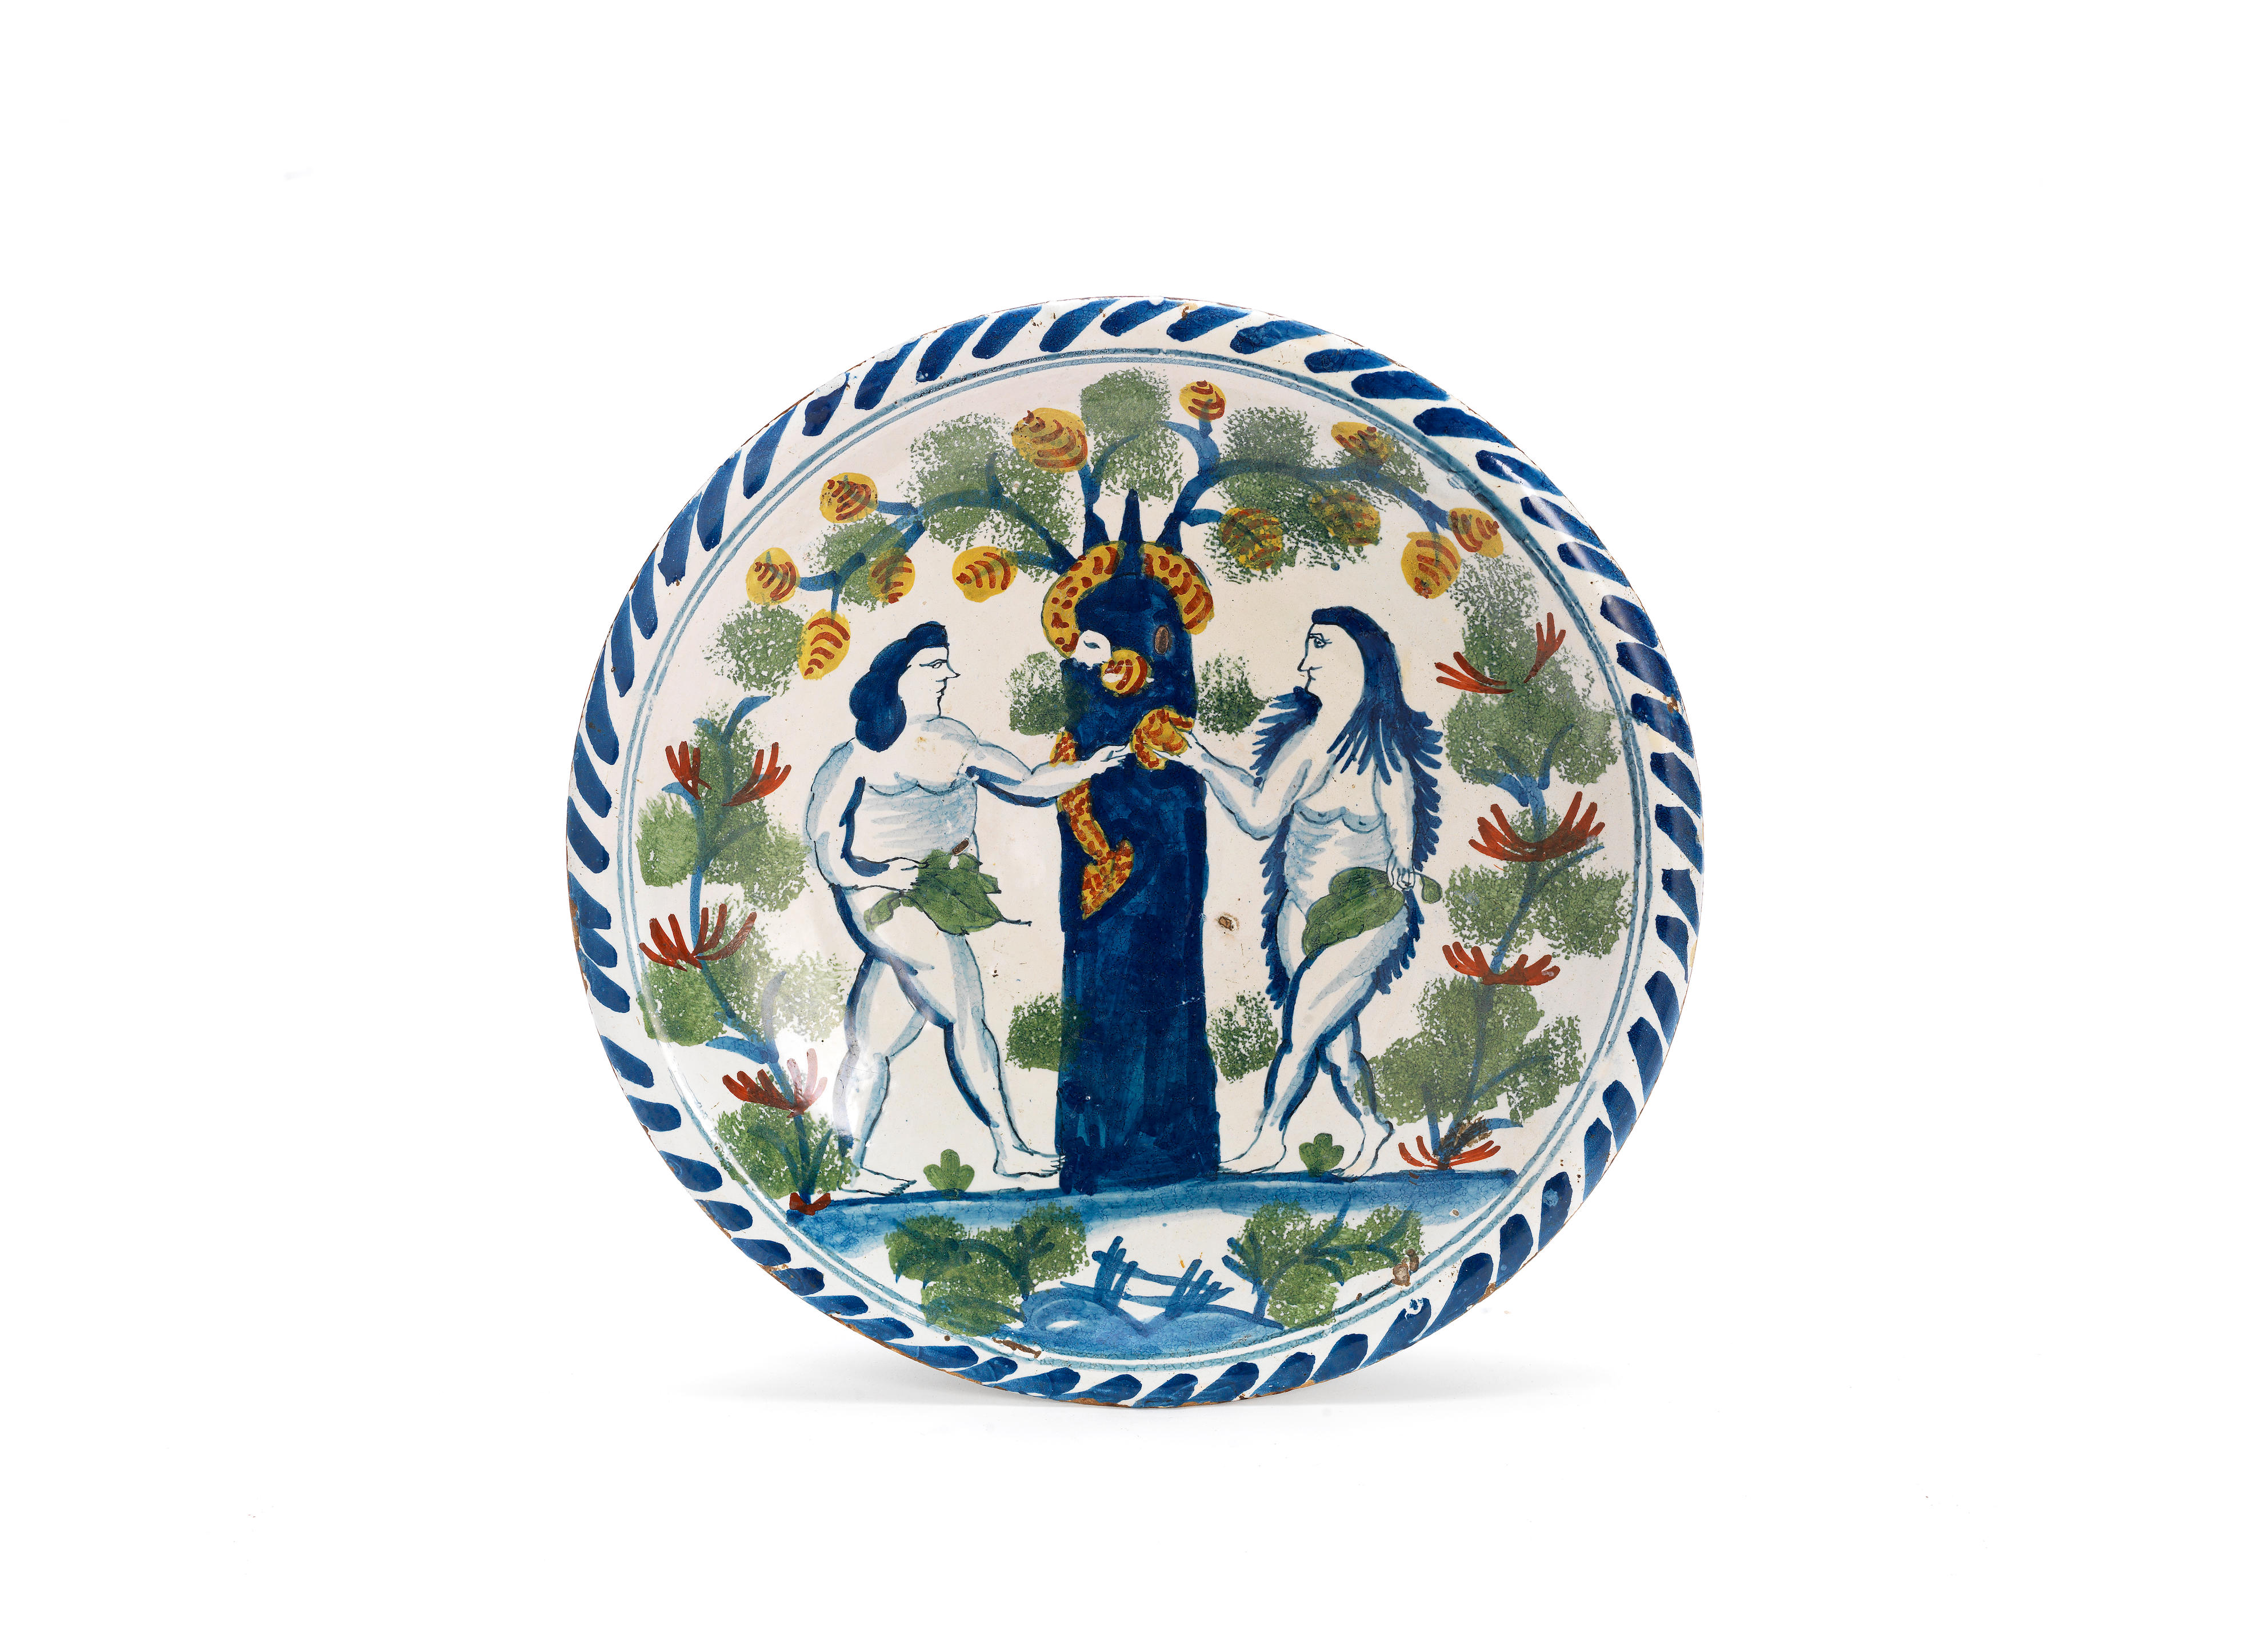 Another Bristol delftware Adam and Eve chrger, circa 1740